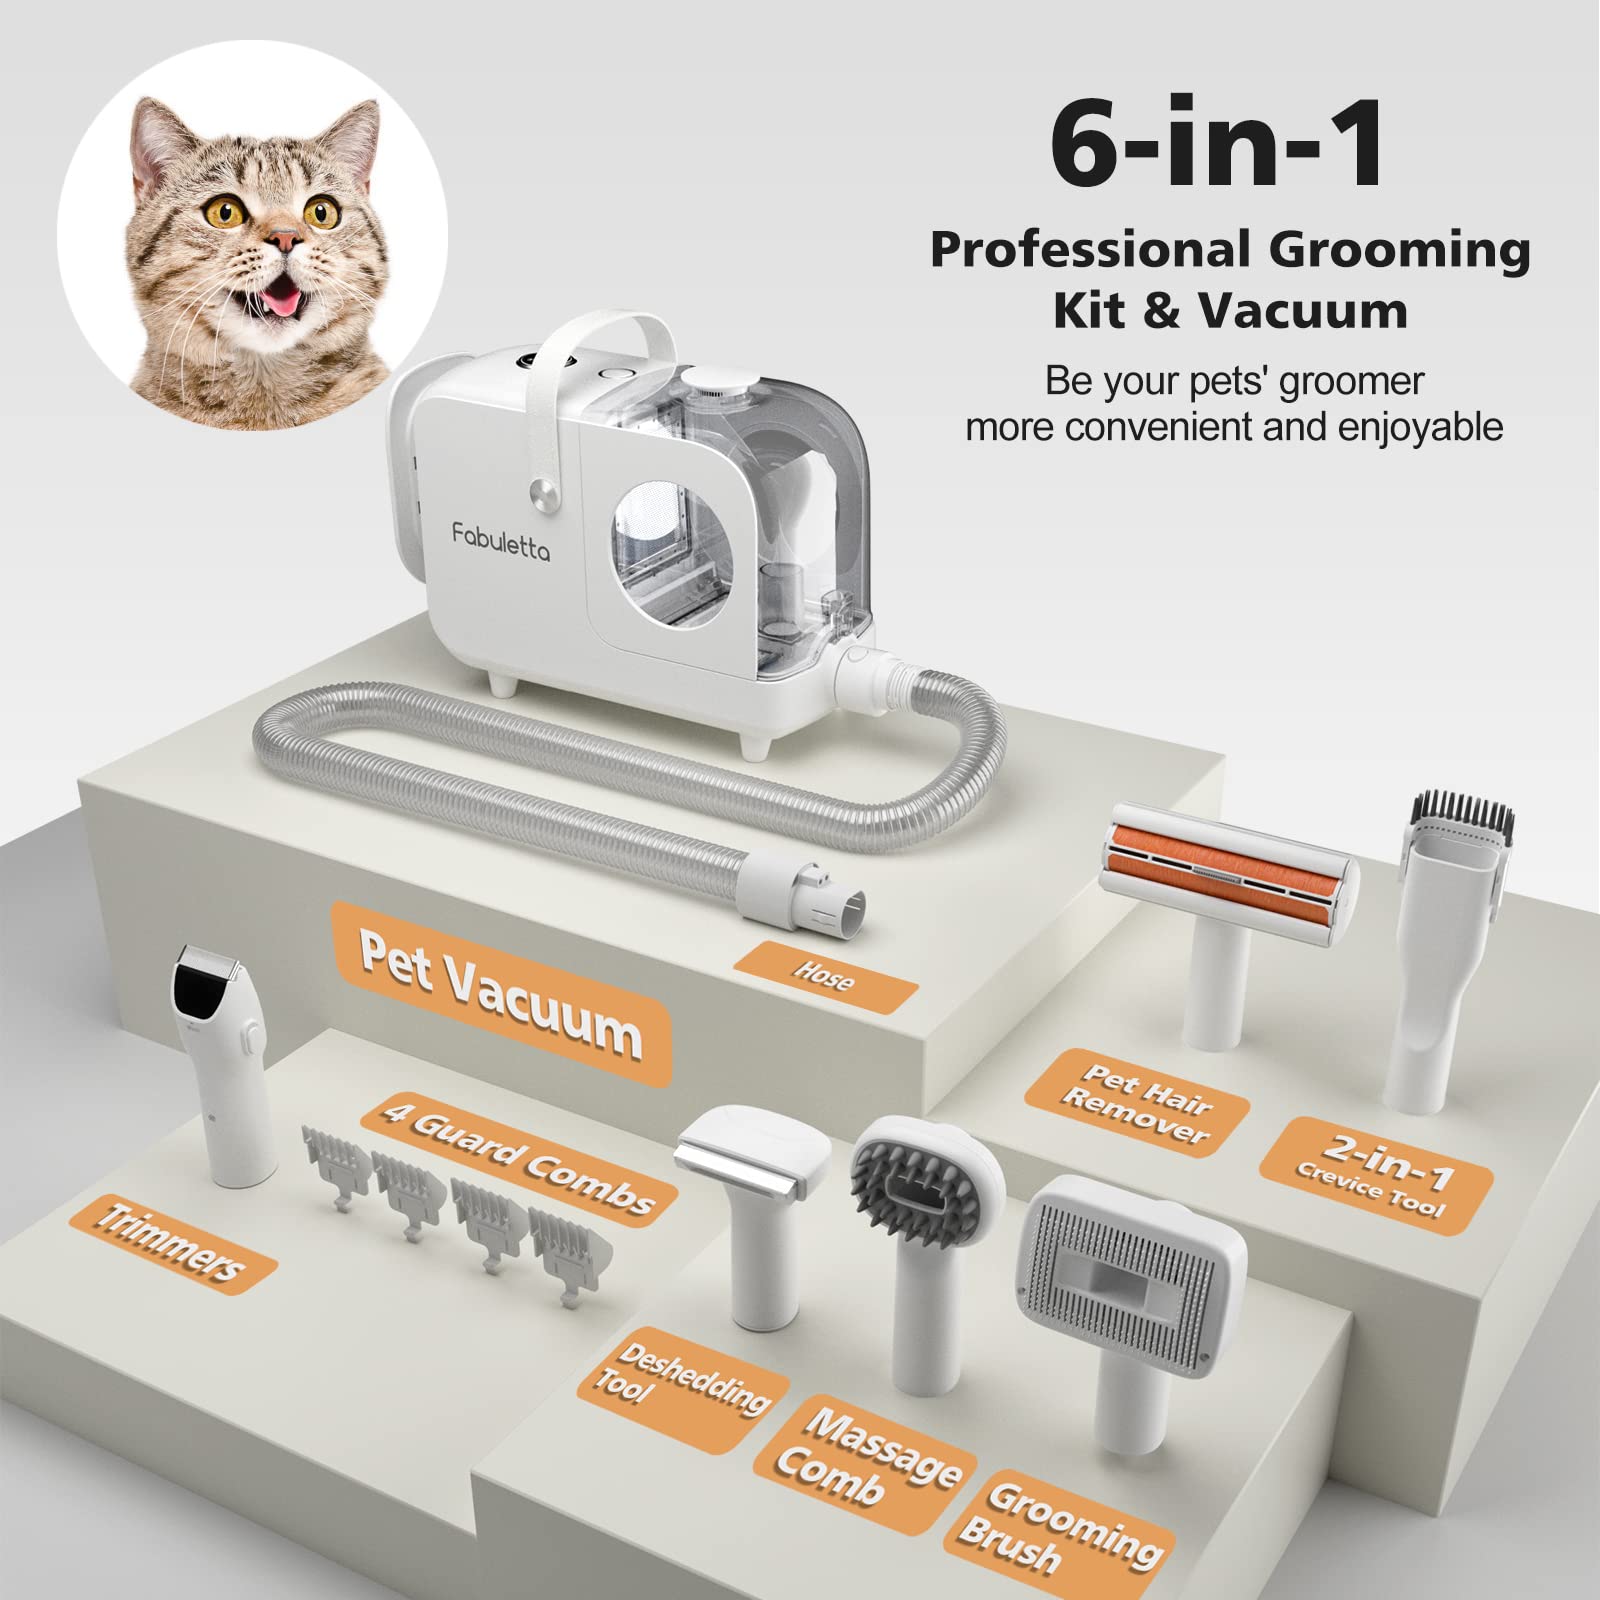 Fabulett 6 in 1 Dog Grooming Kit with suction and cannister collection multiple brushing and trimming attachments $100